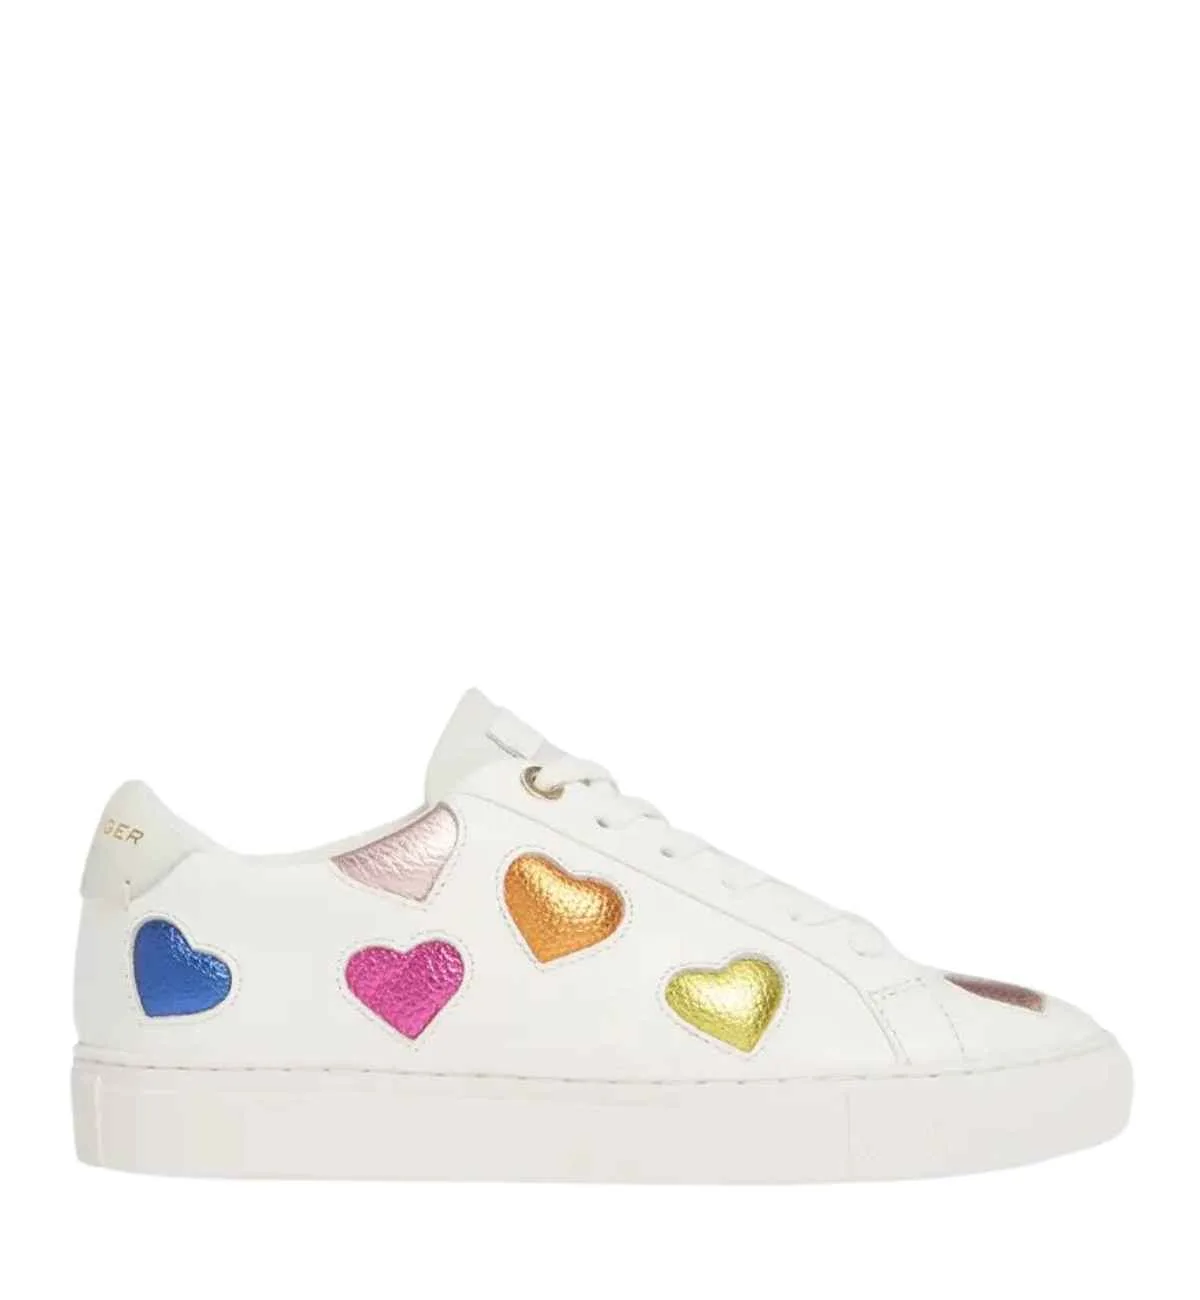 White heart sneaker with different coloured heart embroidery on the side on white background.